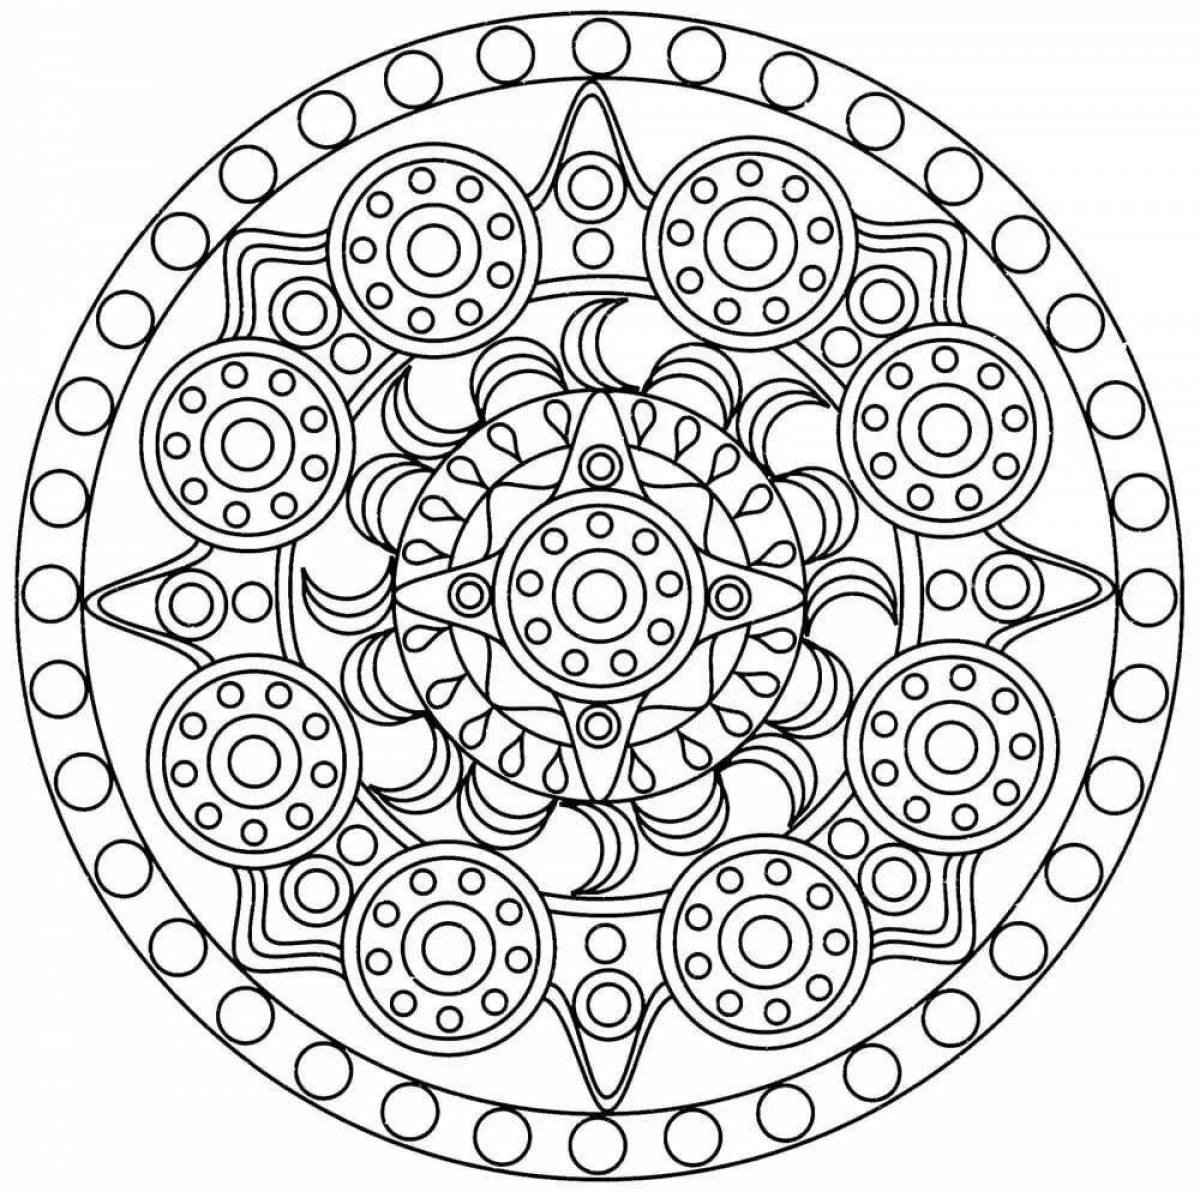 Grand coloring mandala for achievement and success